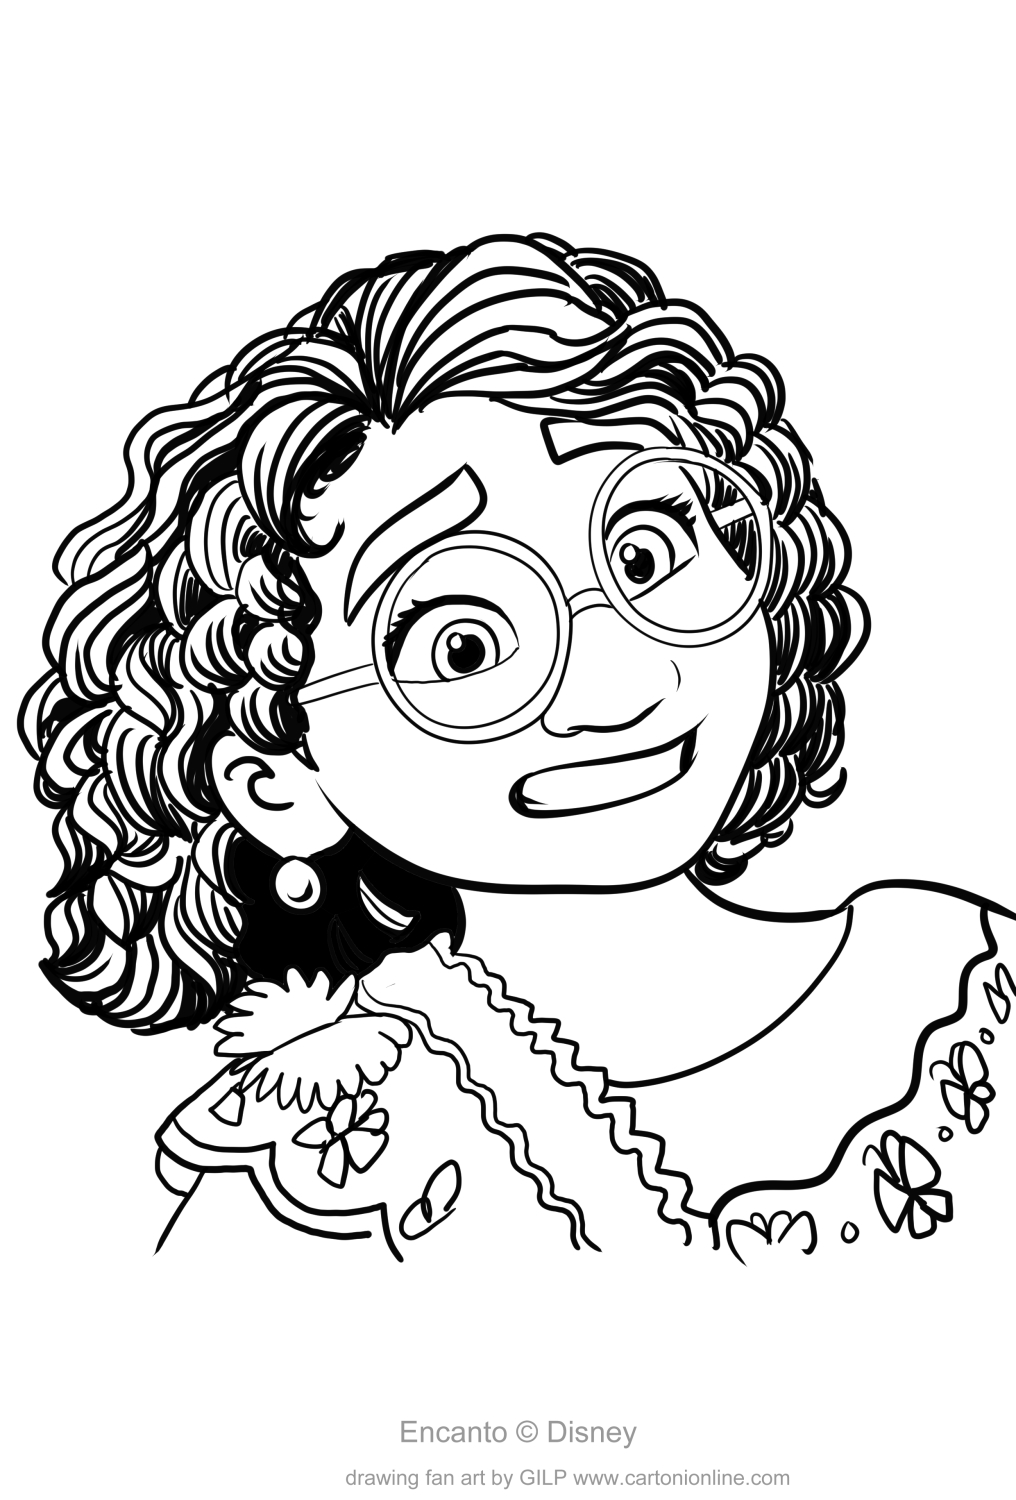 Mirabel Madrigal from Encanto coloring page to print and coloring